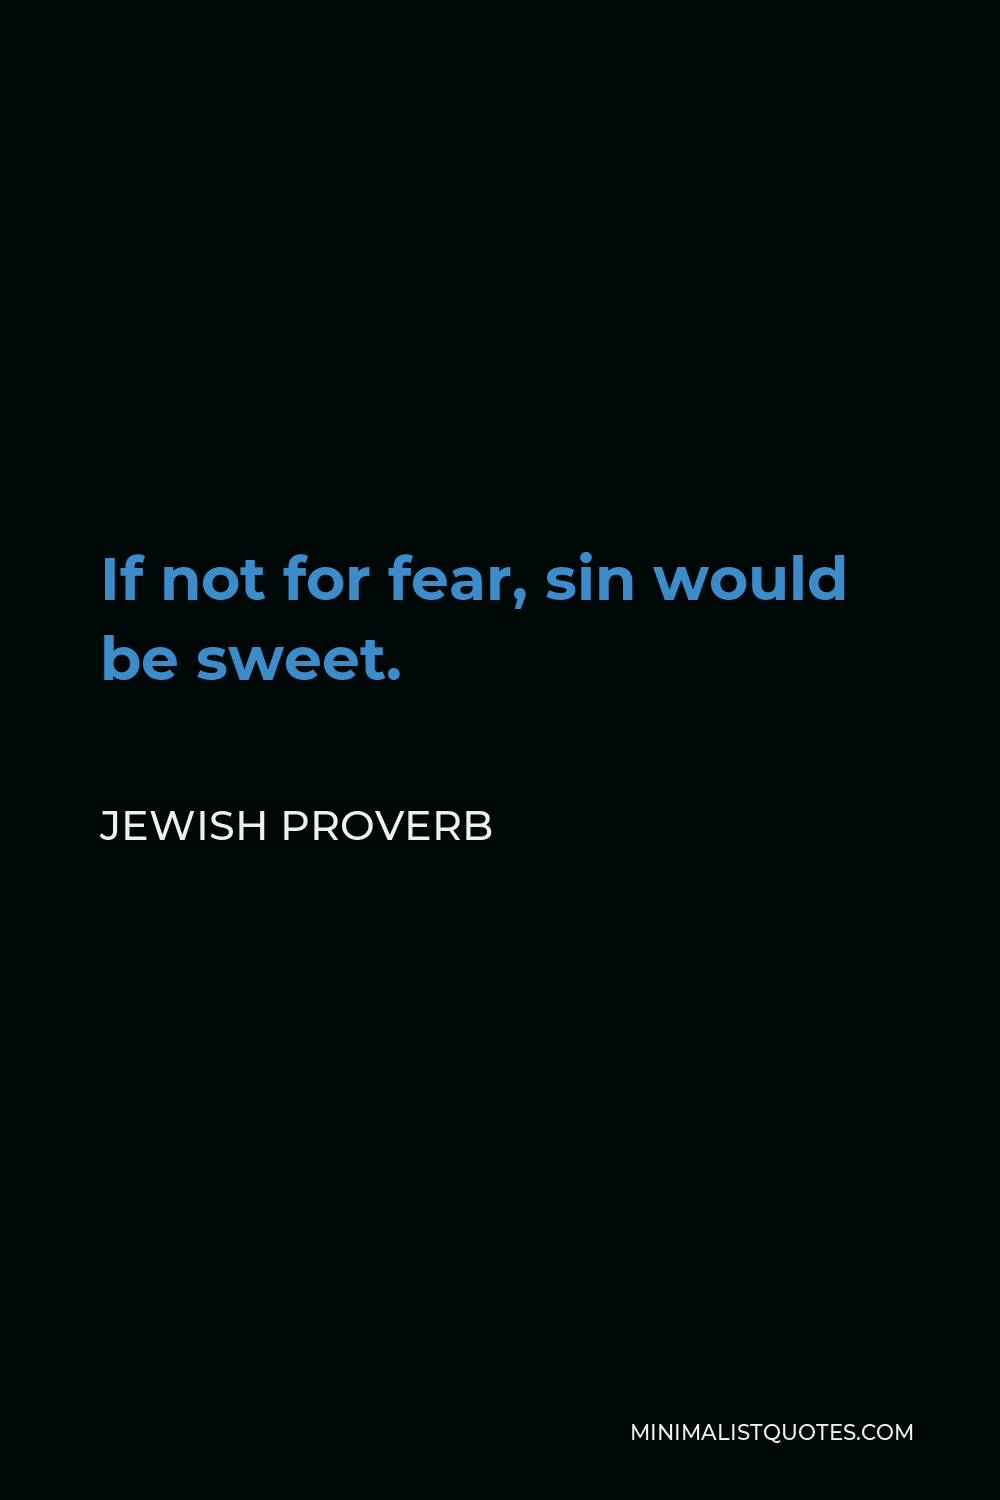 Jewish Proverb Quote - If not for fear, sin would be sweet.